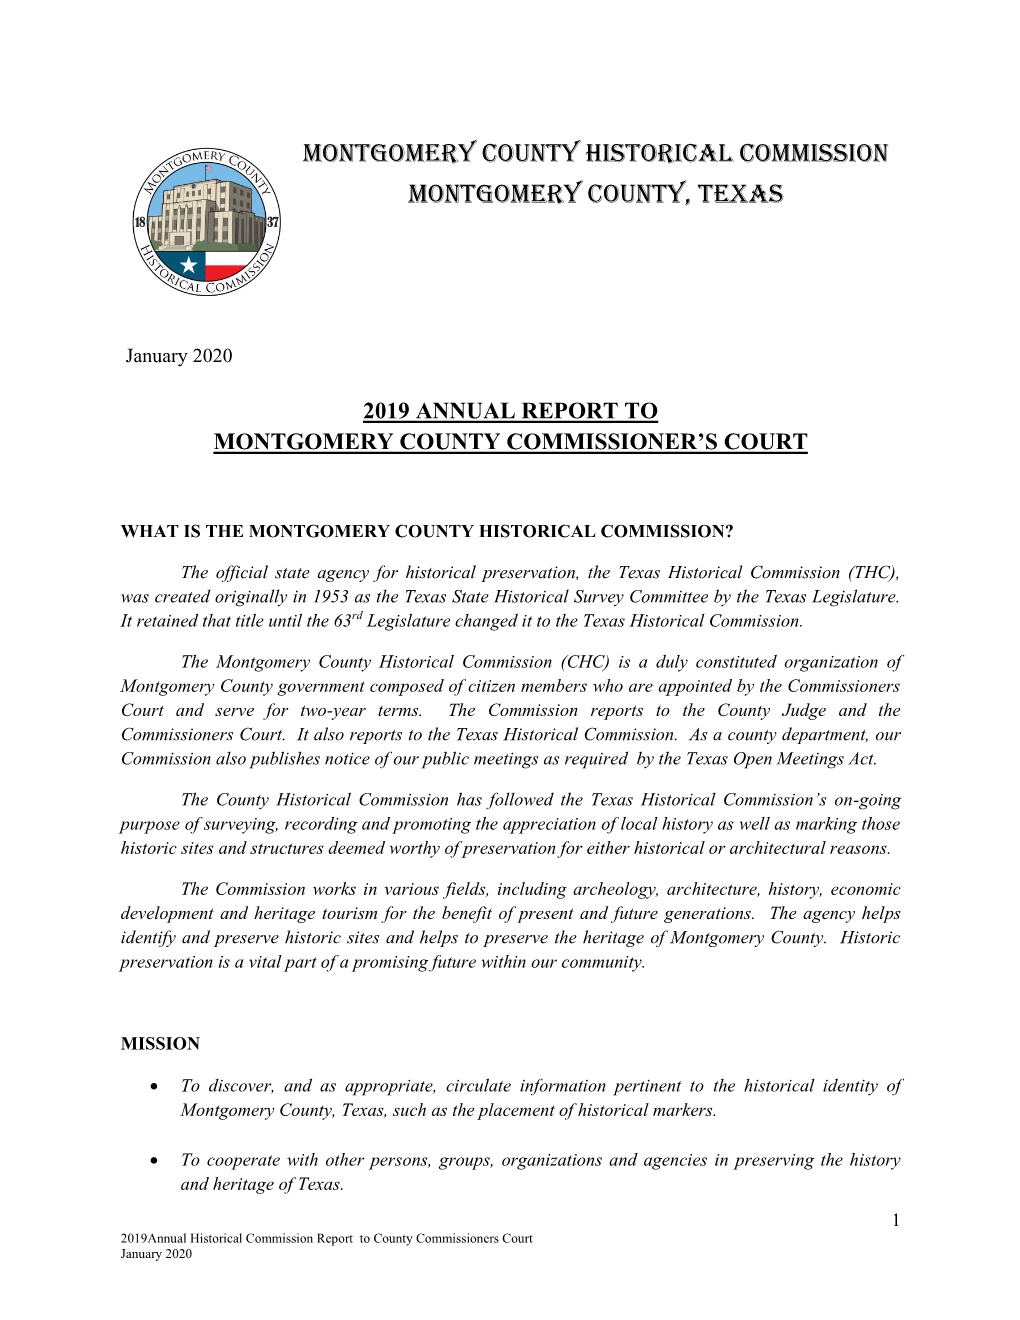 2019 Annual Report to Commissioners Court